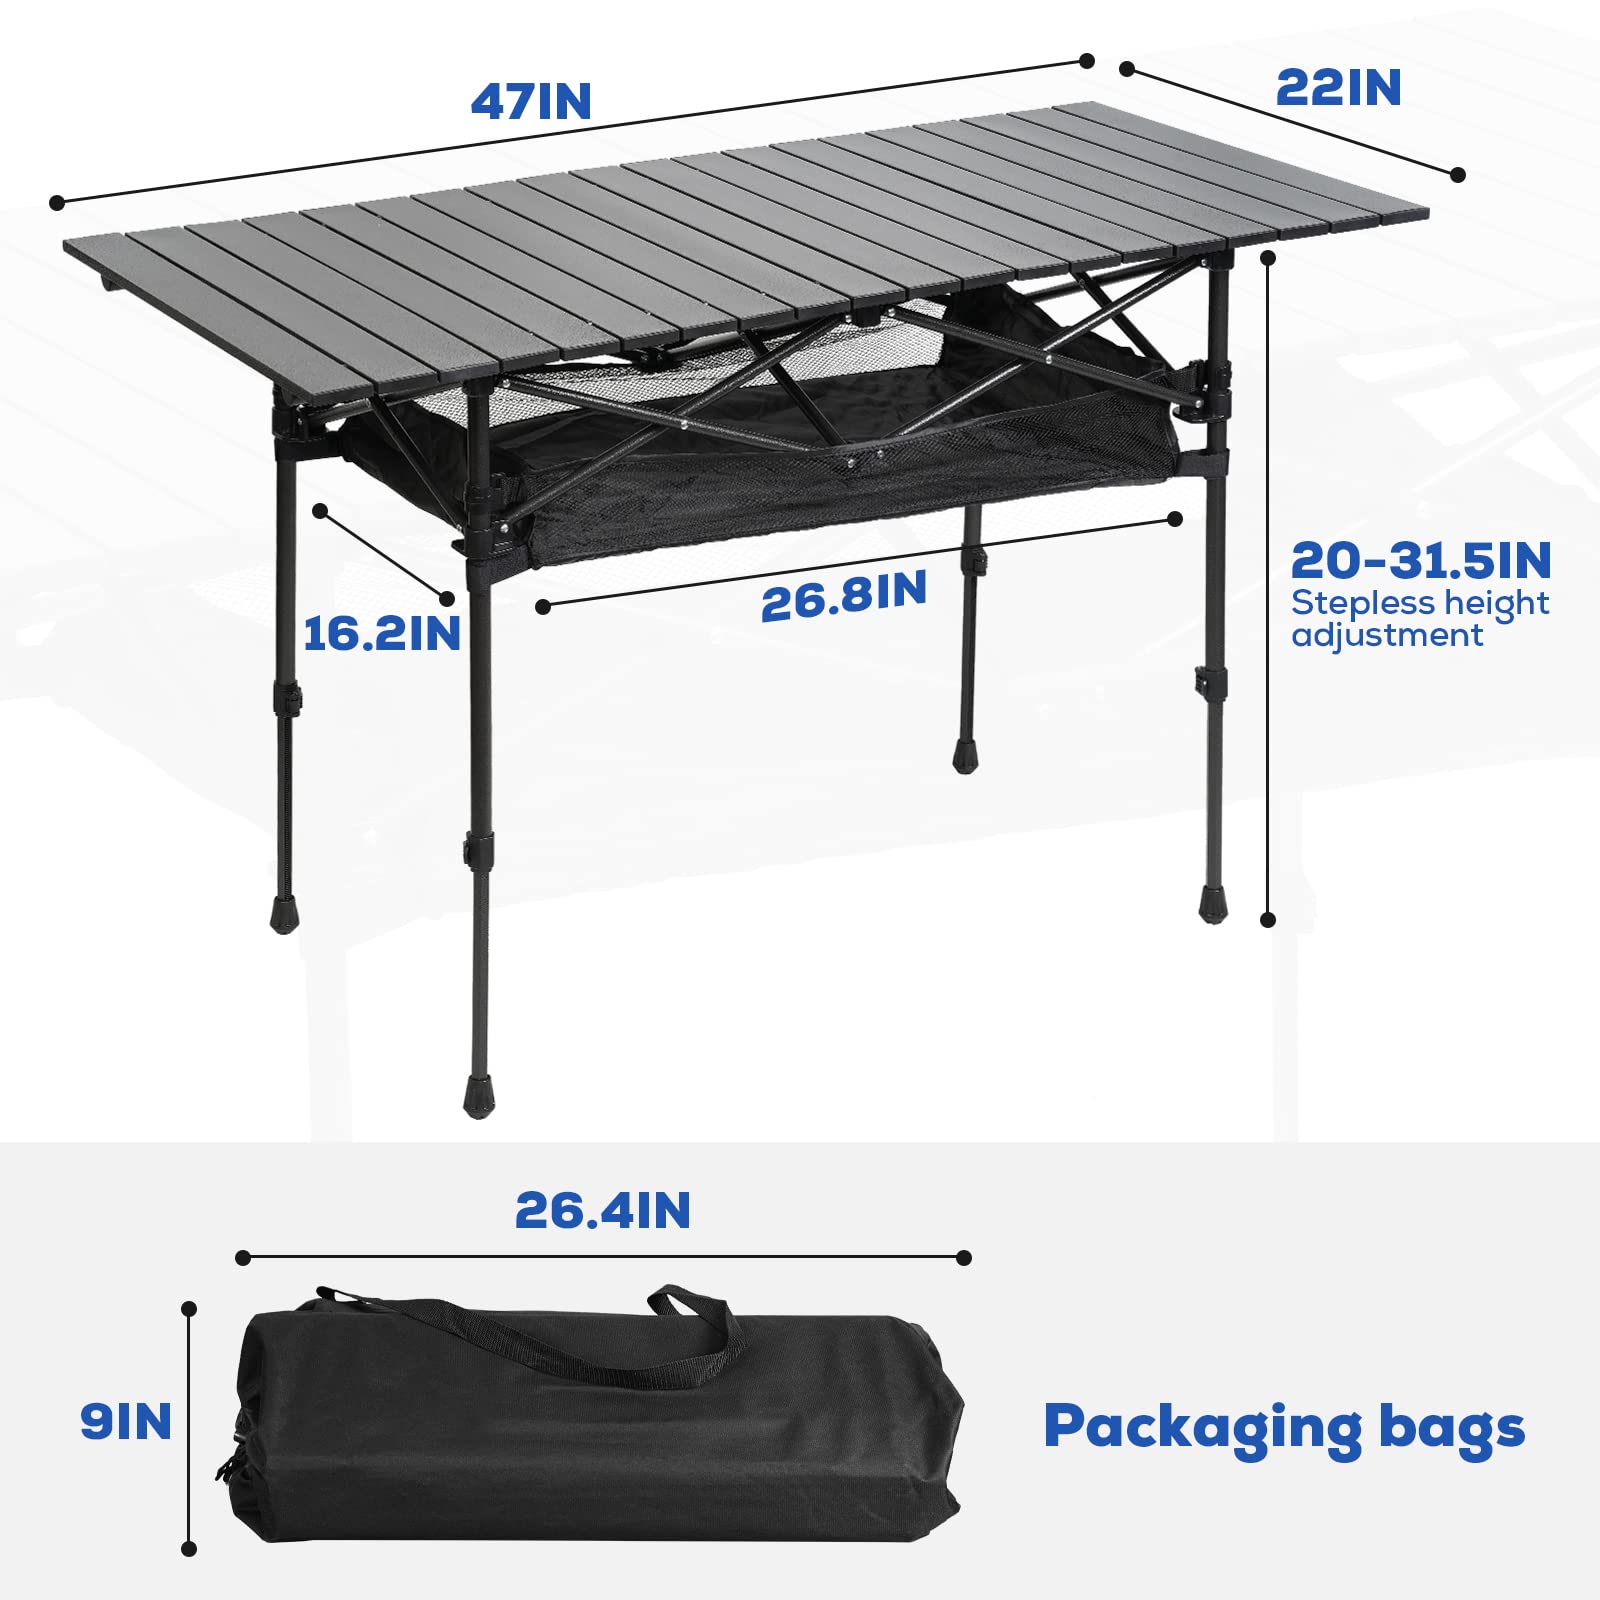 LEBLEBALL Folding Camping Table, Portable Folding Table with Storage Bag, Adjustable Aluminum Camping Table for Outdoor Picnic, Beach, Backyard, BBQ, Patio, Fishing, Black